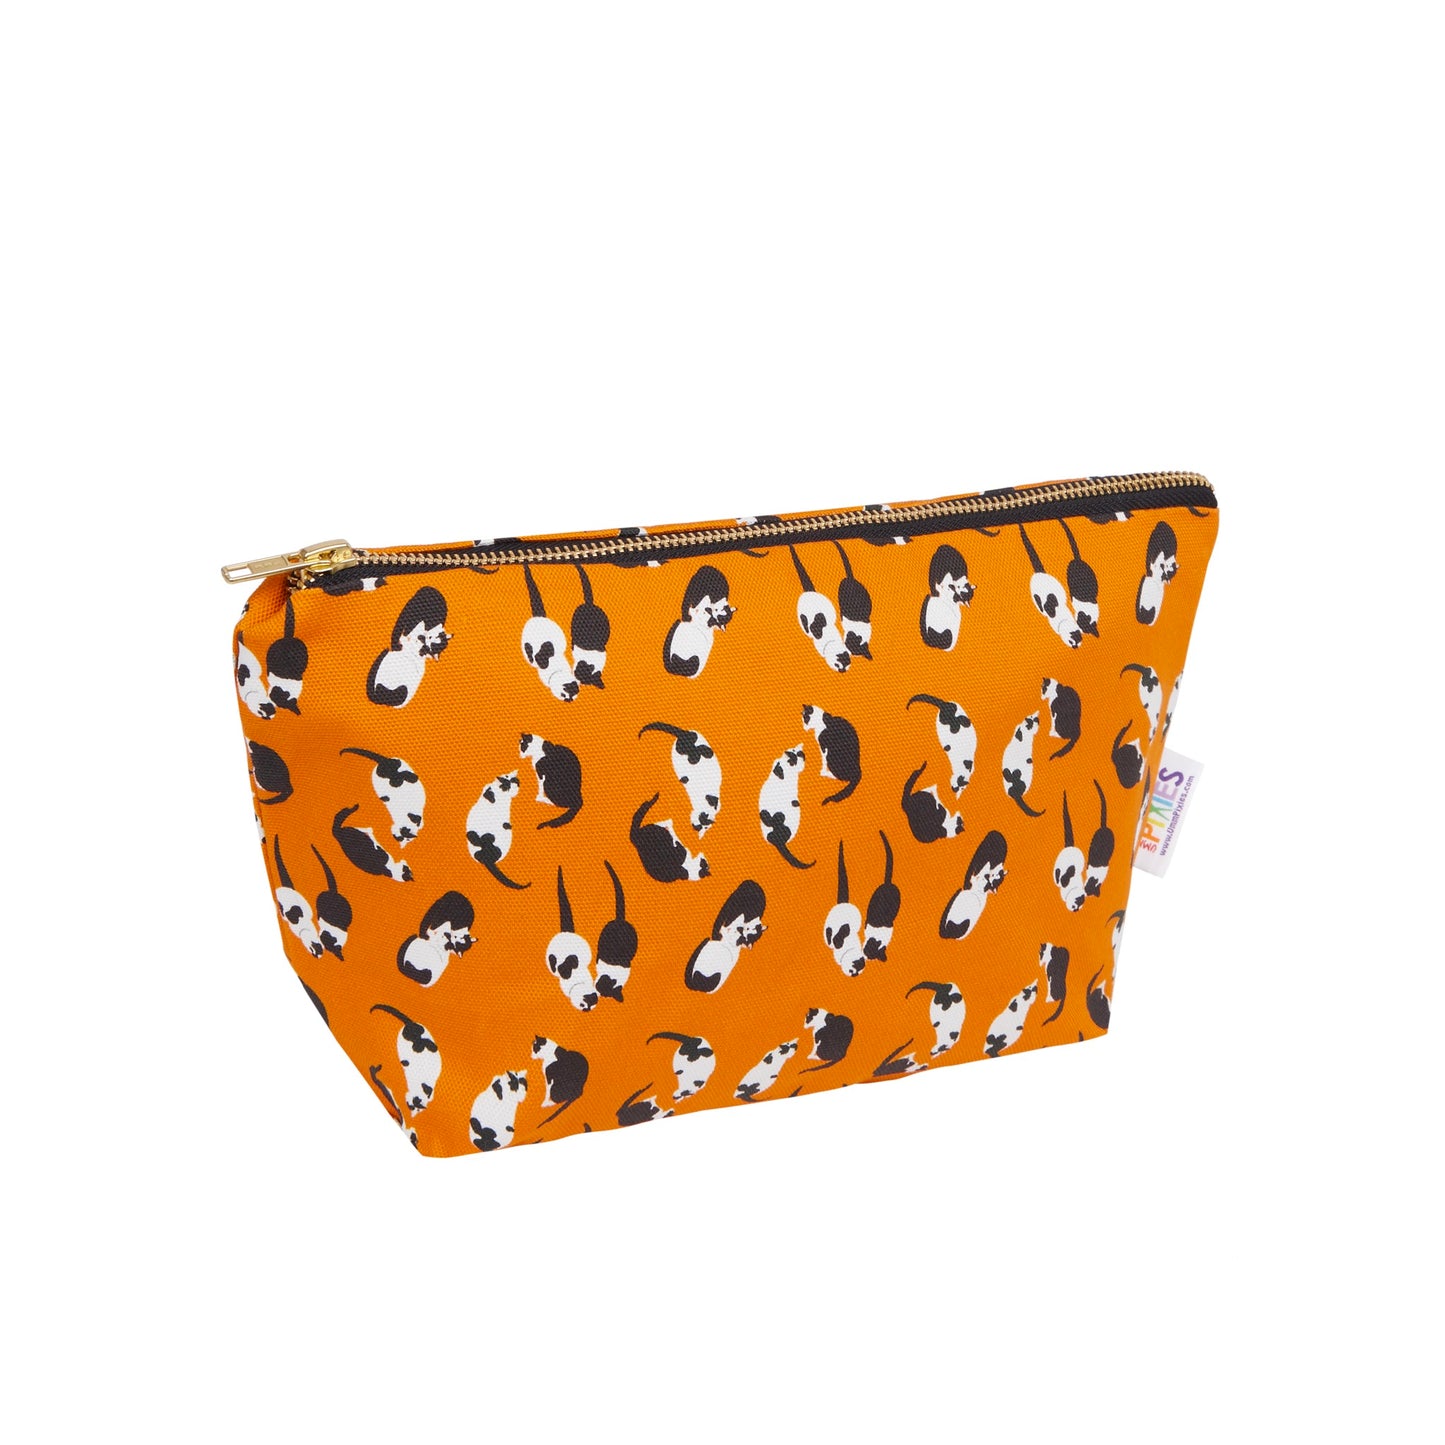 Orange cat bag with zipped closure . Organic cotton with printed waterproof lining